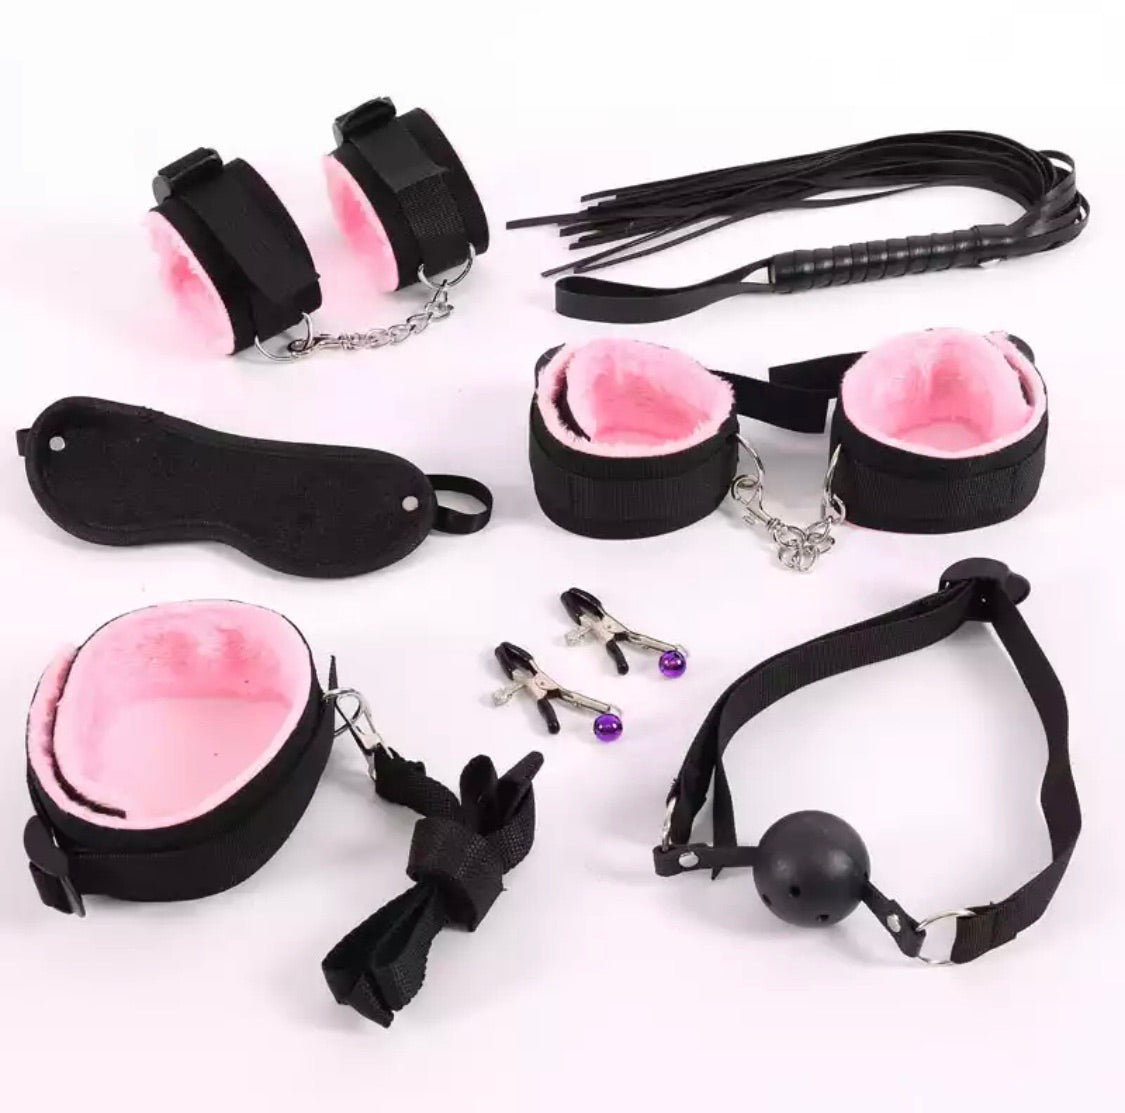 DDLGVERSE 7pcs Bondage set; handcuffs, anklecuffs, flogger, blindfold, collar and leash, nipple clamps, ball gag in pink and black